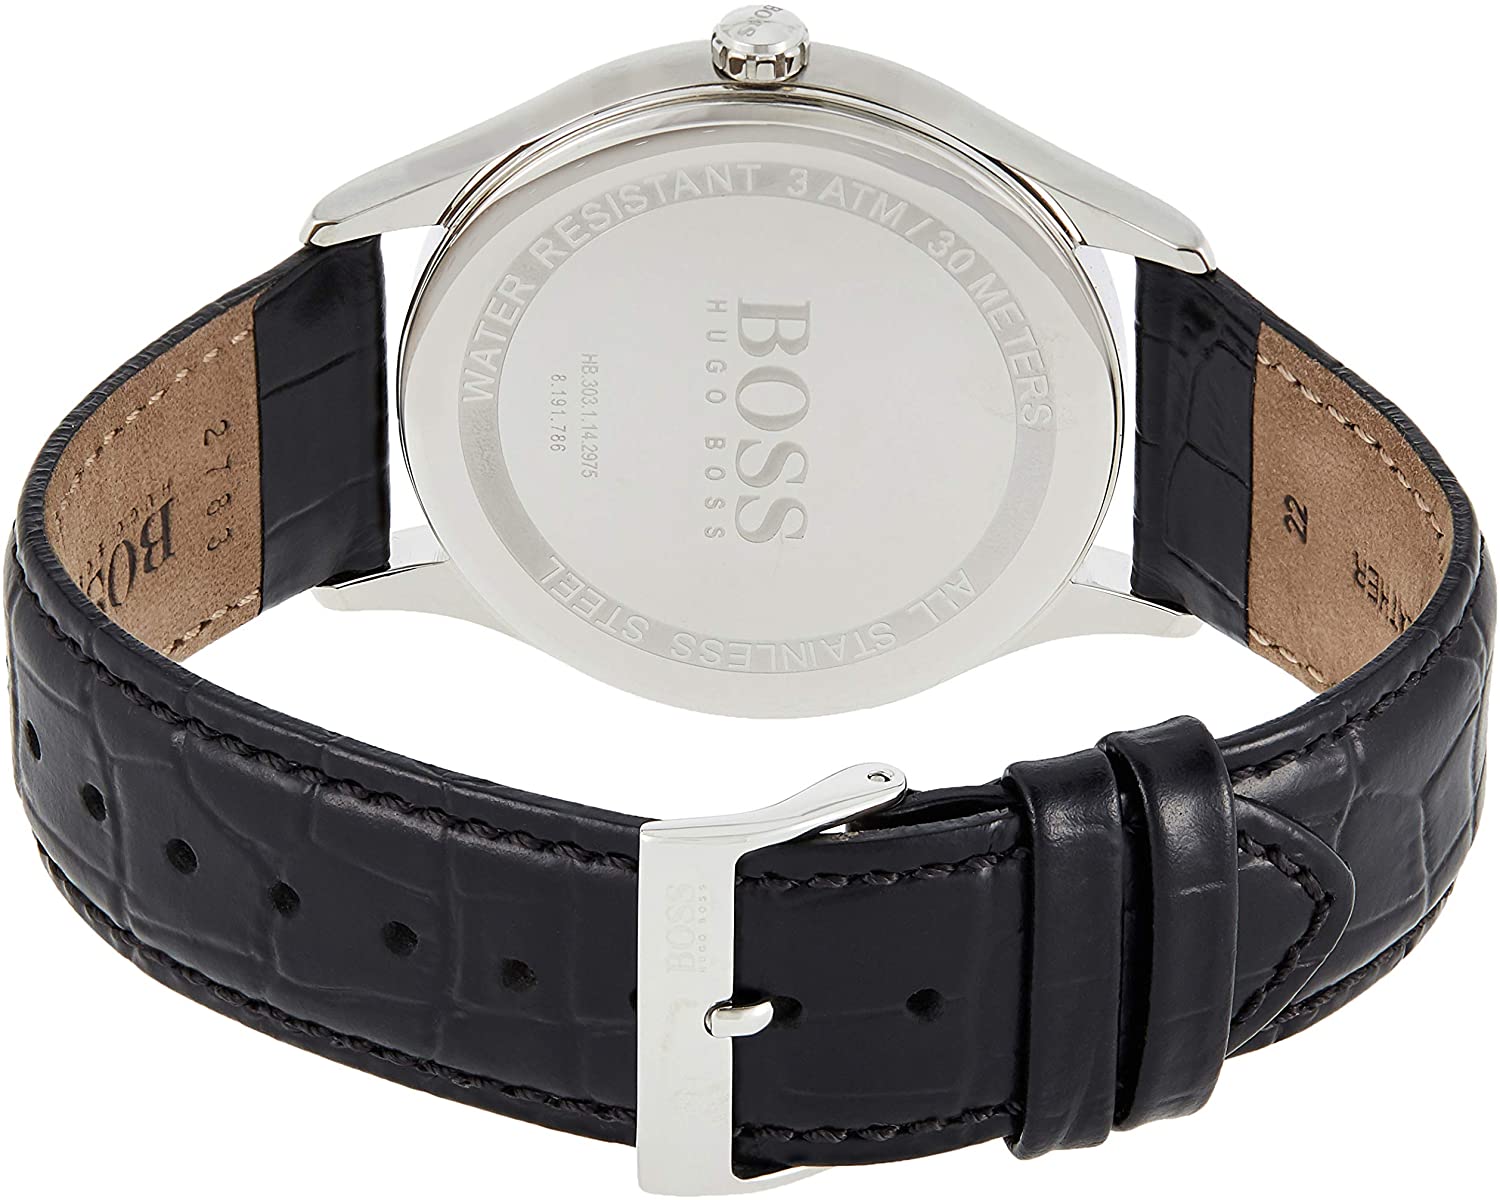 Boss GOVERNOR CLASSIC 1513485 Mens Wristwatch Classic & Simple